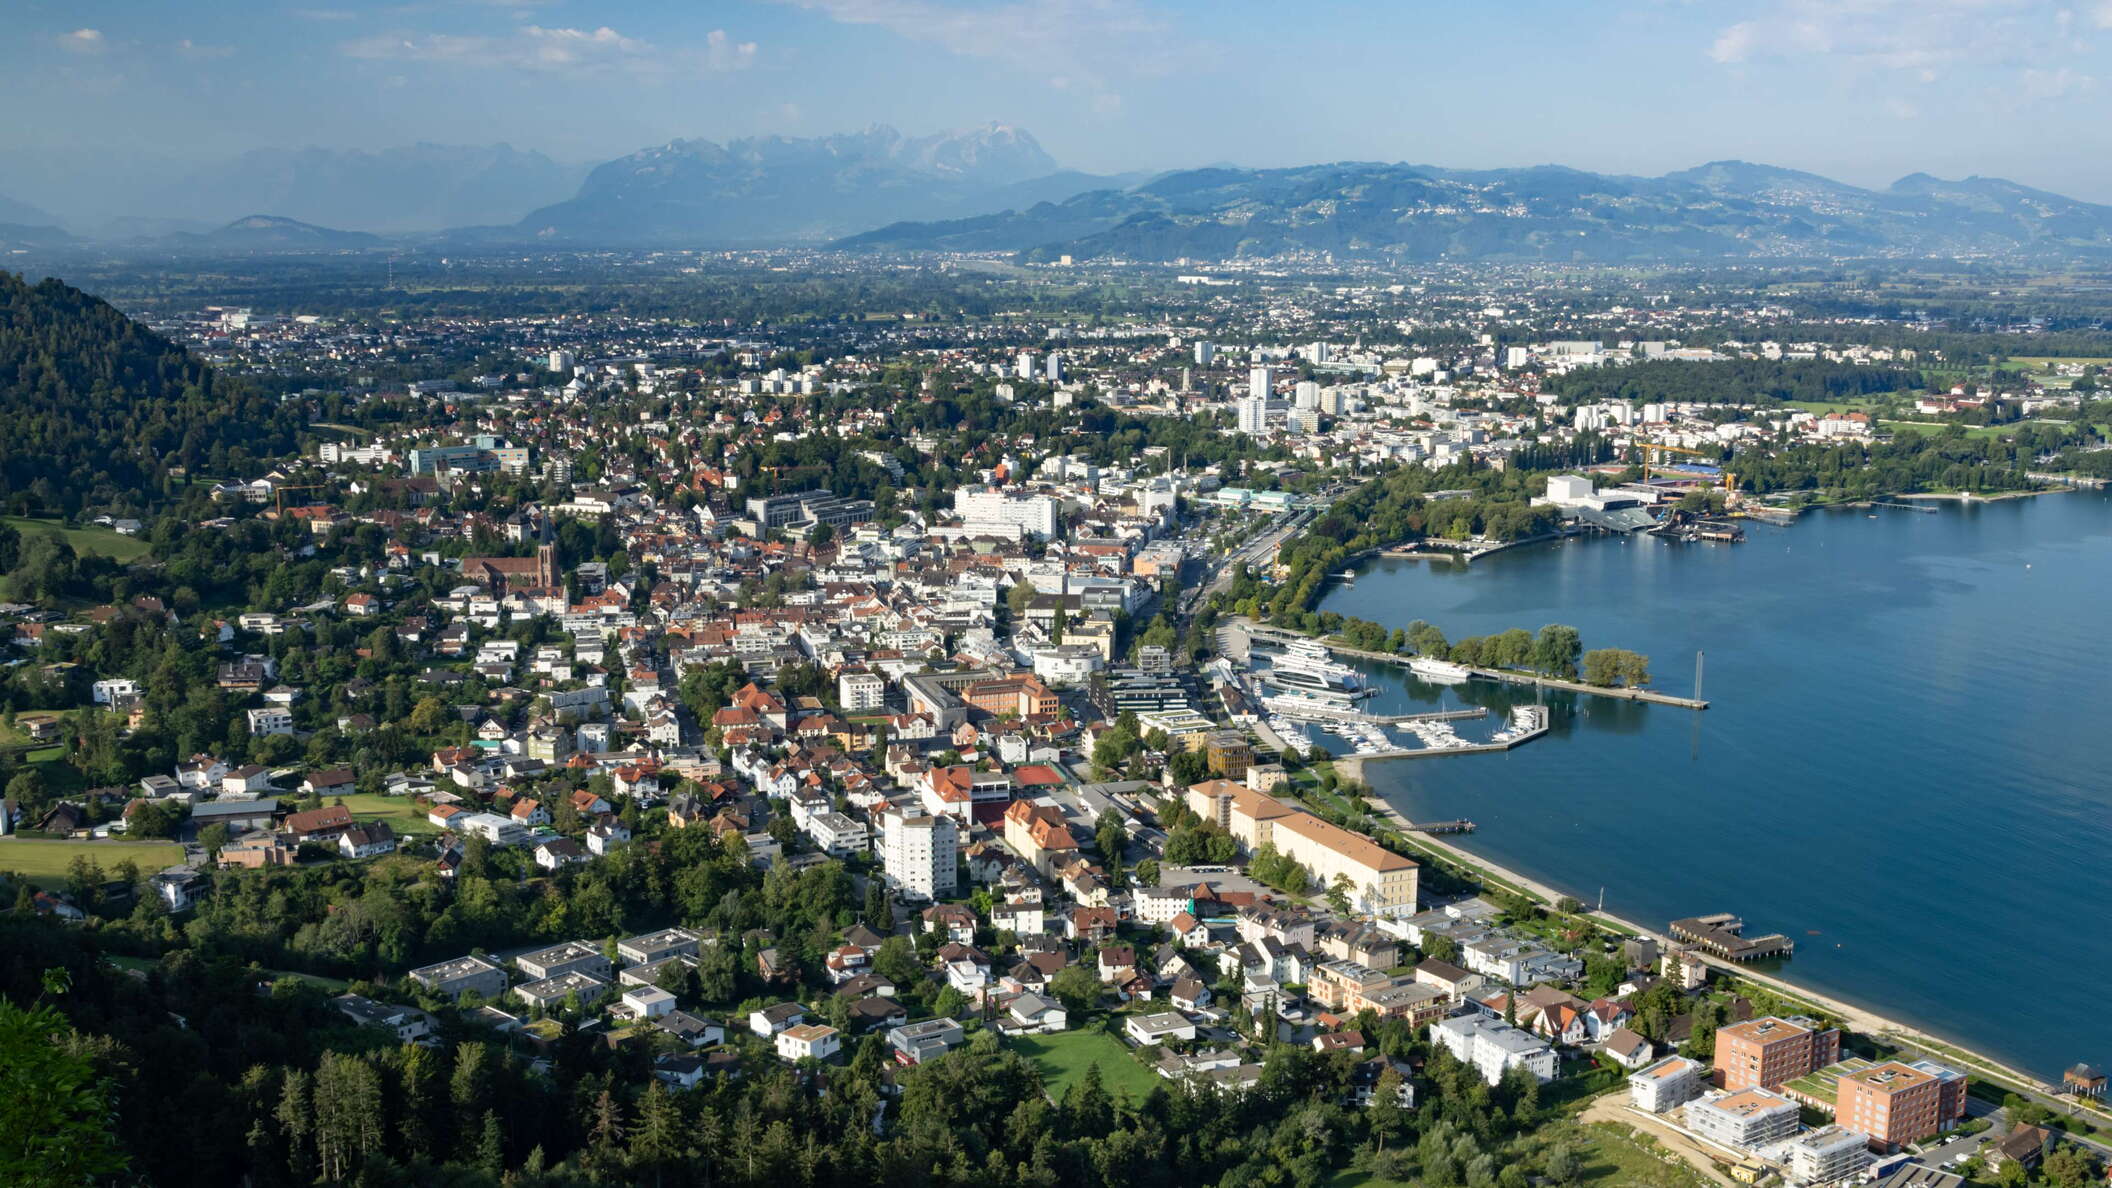 Bregenz with Bodensee and Säntis